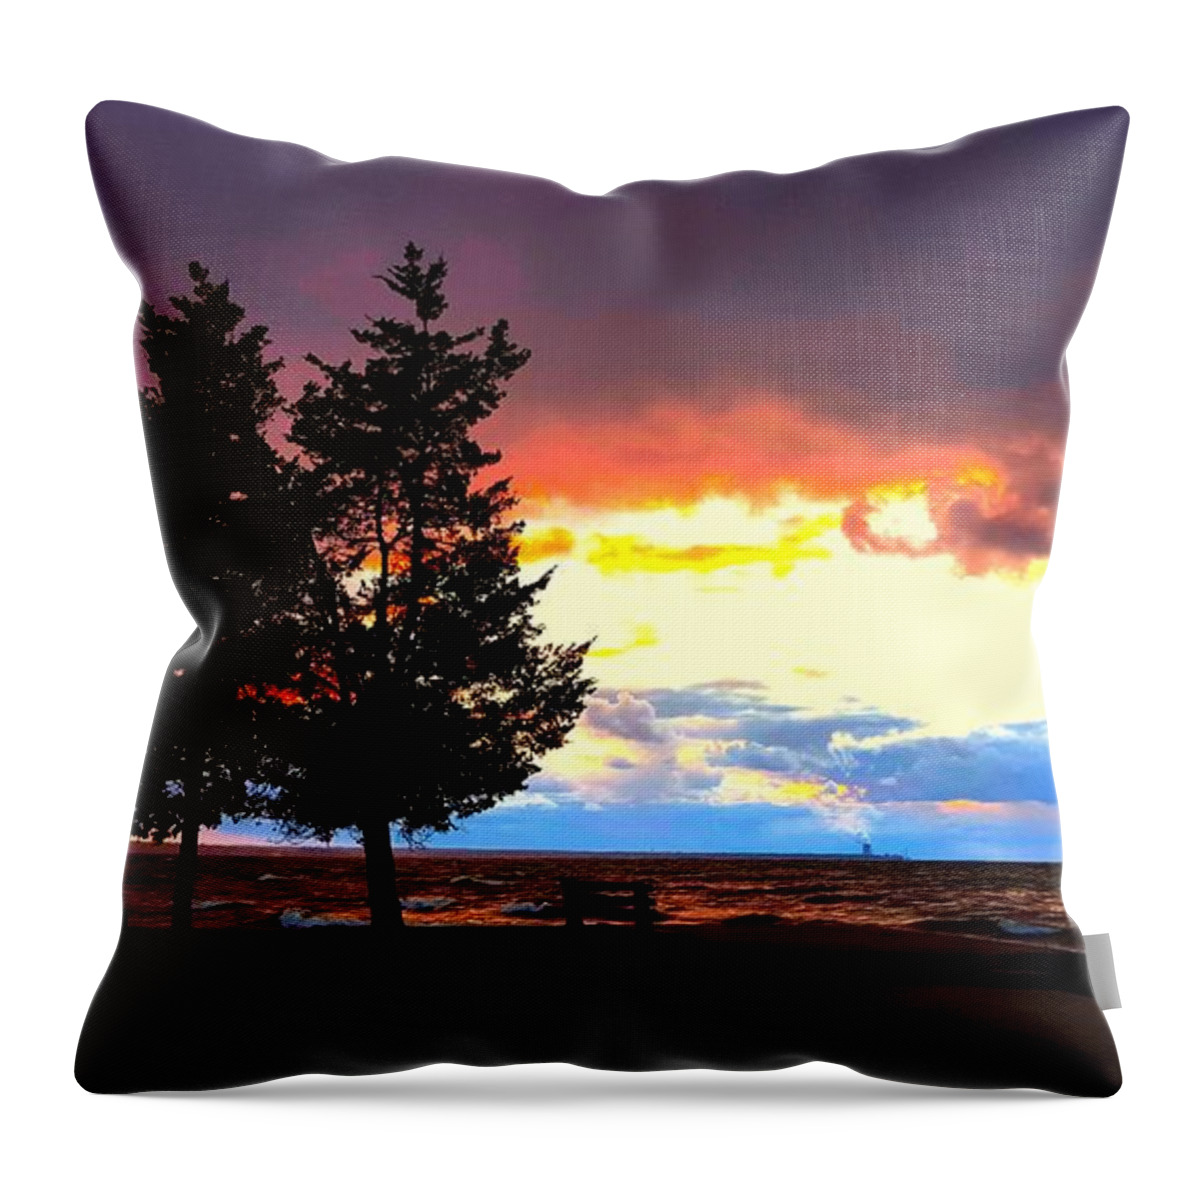 Lake Throw Pillow featuring the photograph Lingering Light by Dani McEvoy